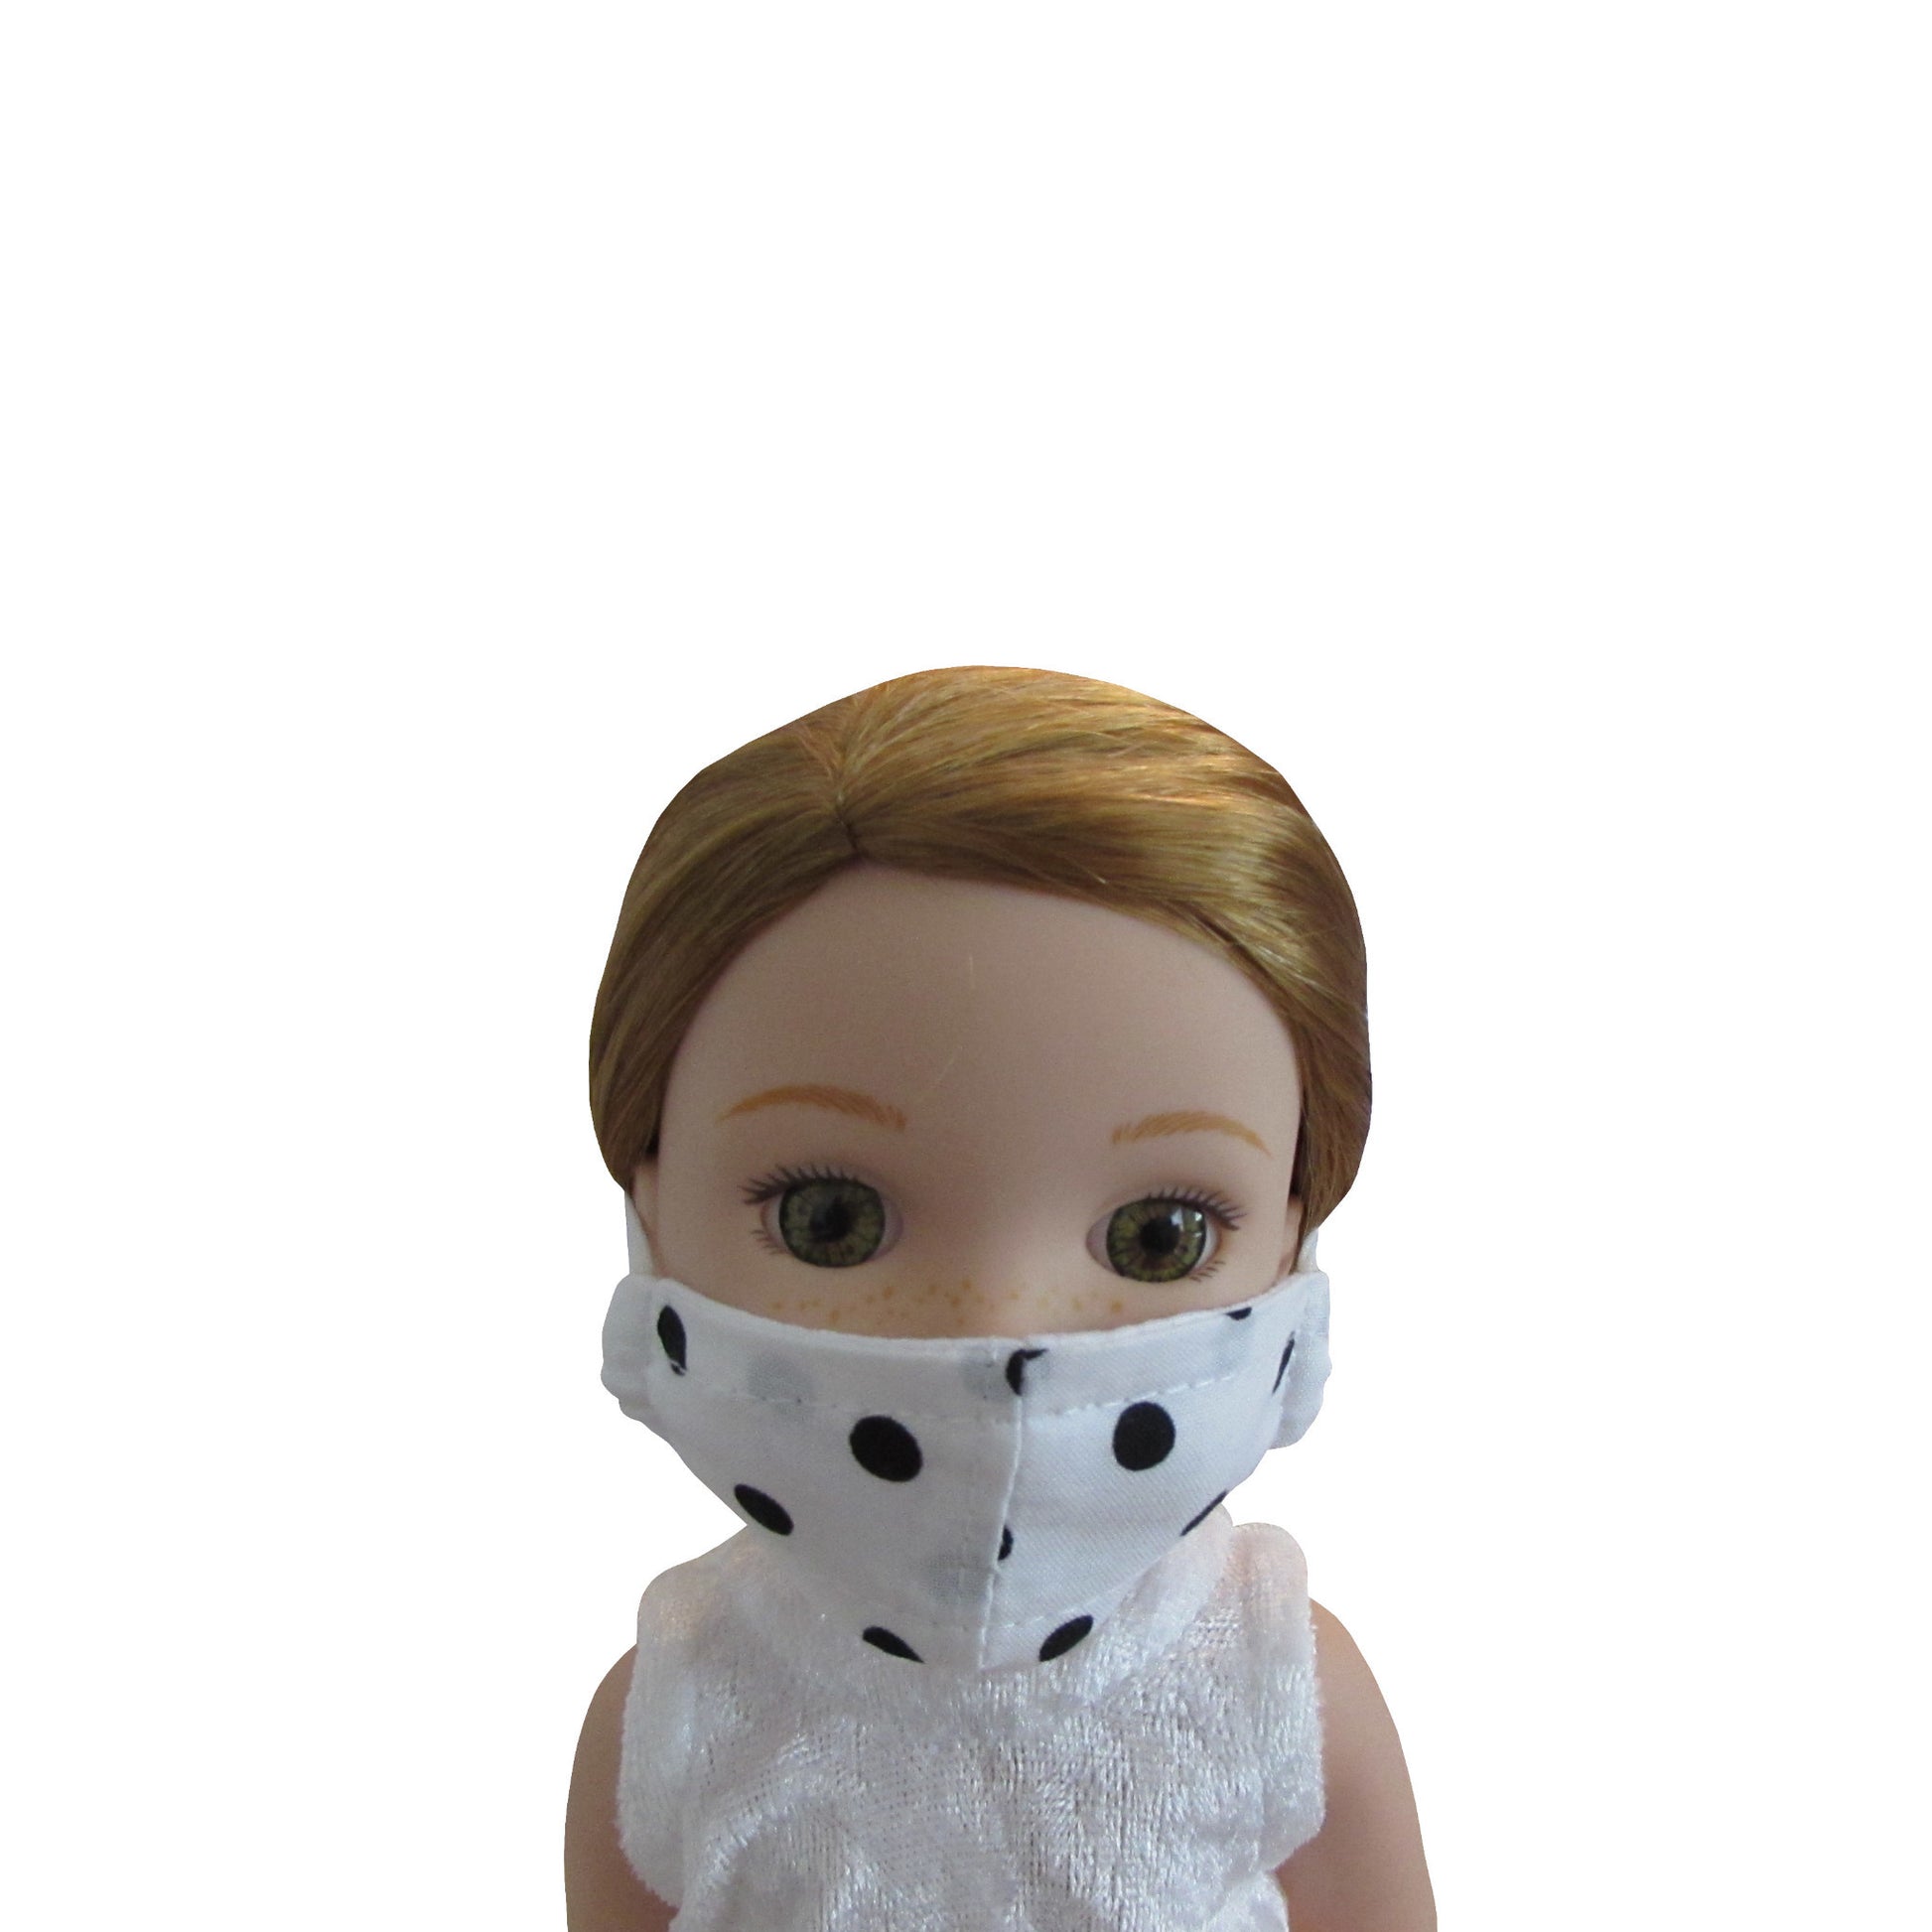 Black Dots on White Print Doll Face Mask for 14 1/2-inch dolls with Wellie Wishers doll Front